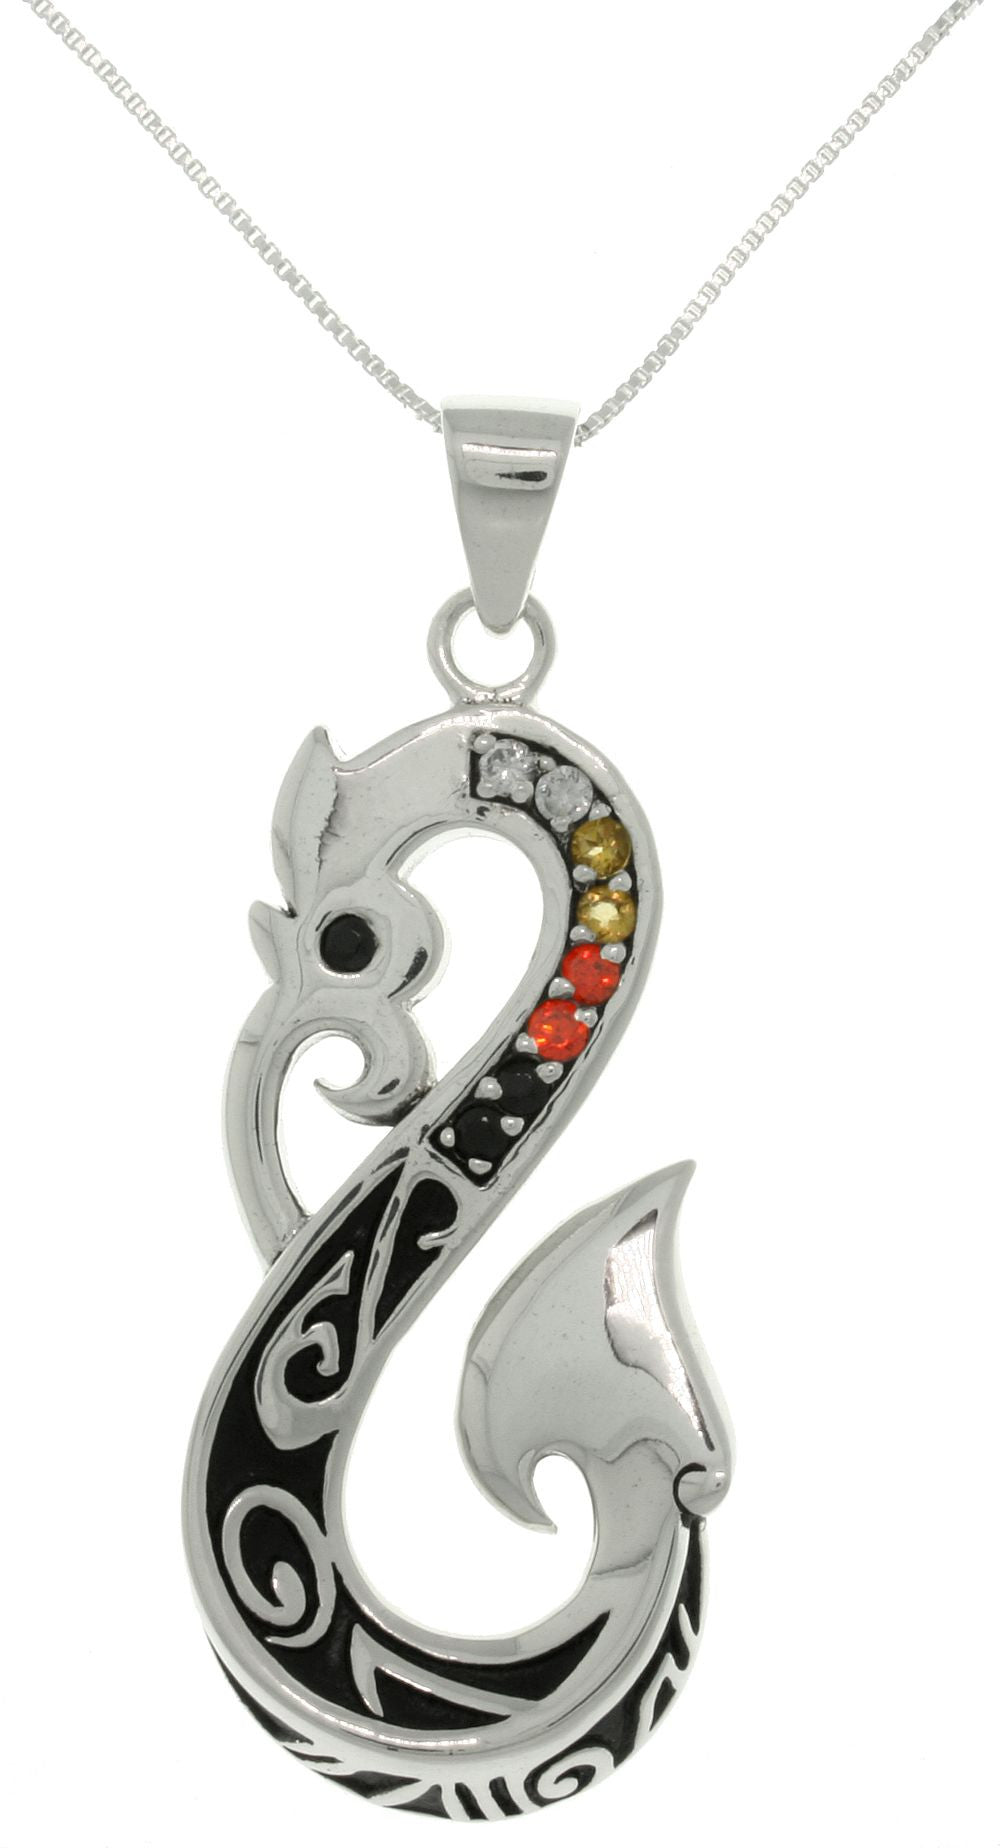 Jewelry Trends Sterling Silver Celtic Viking Dragon Tail Pendant with Austrian Crystals on Chain Necklace